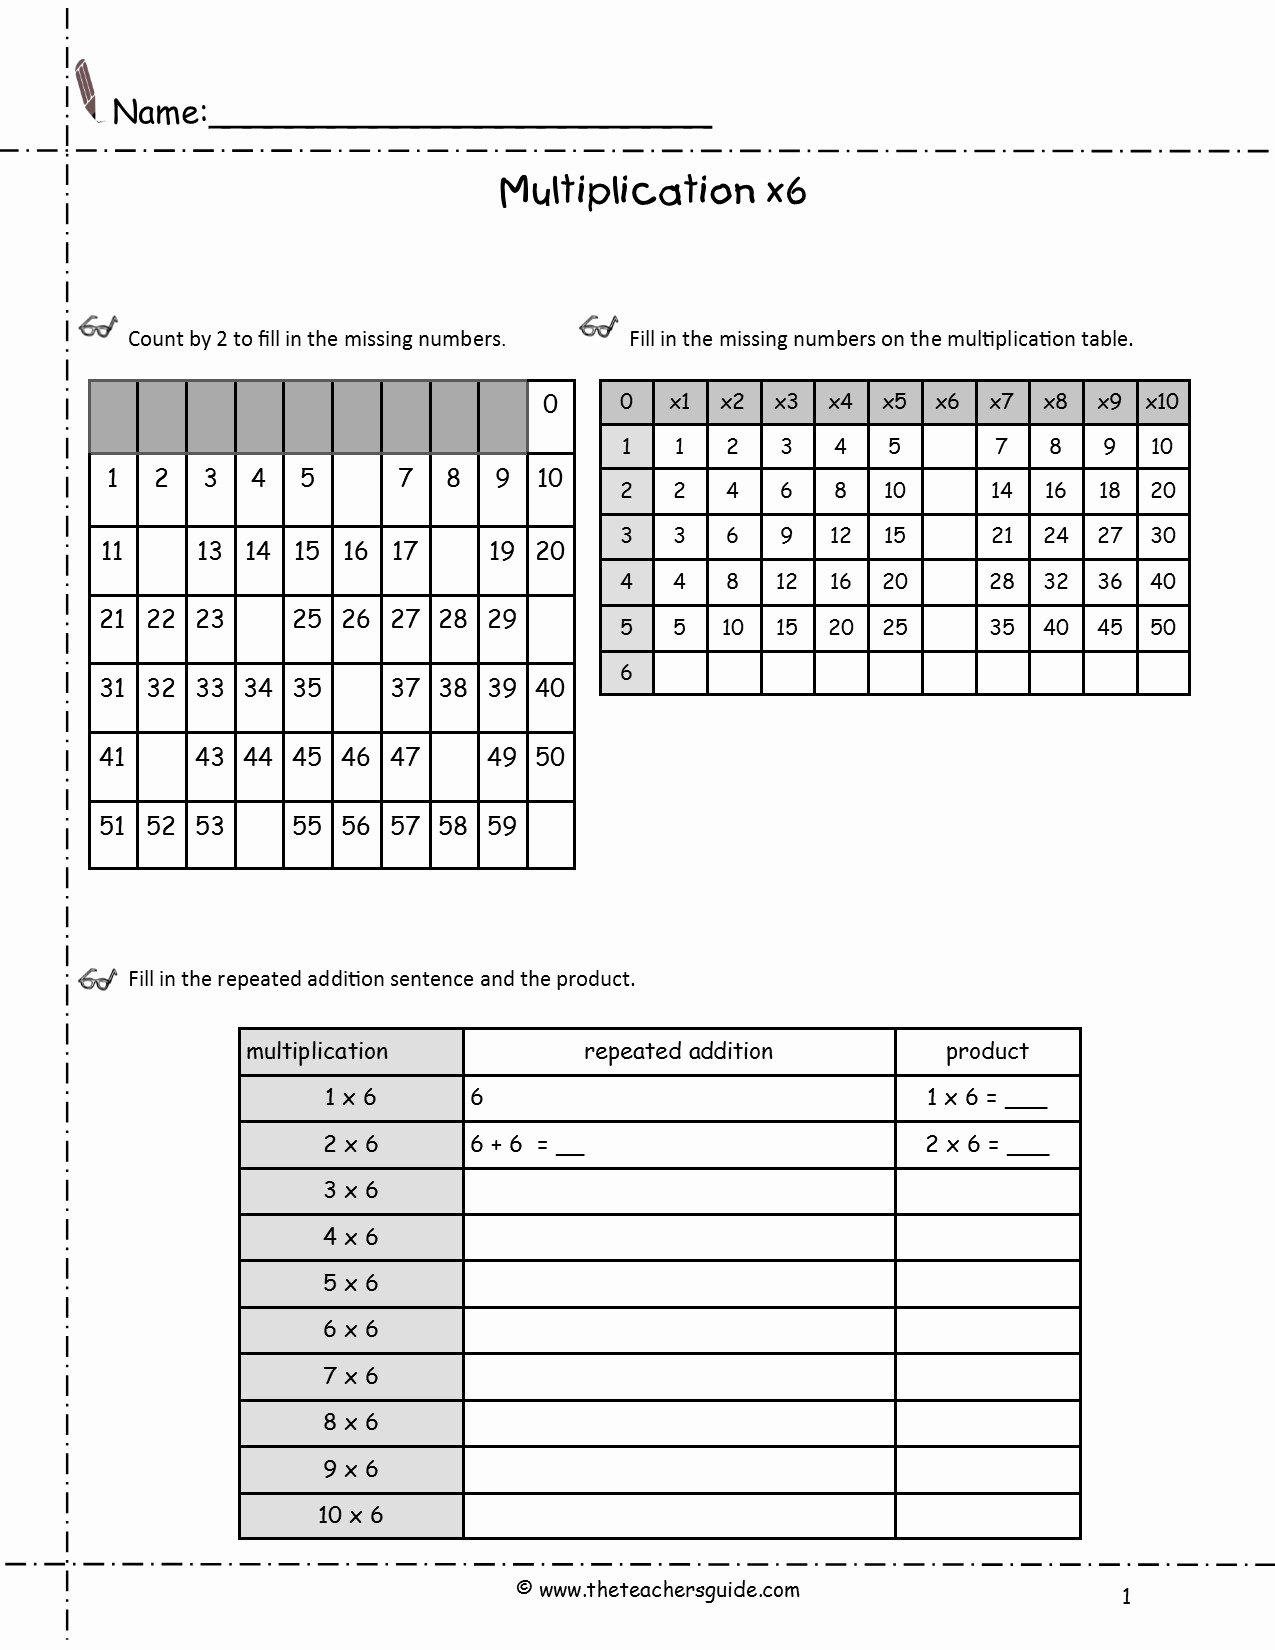 Multiplying by 6 Worksheet Beautiful Multiplication Facts Worksheets From the Teacher S Guide